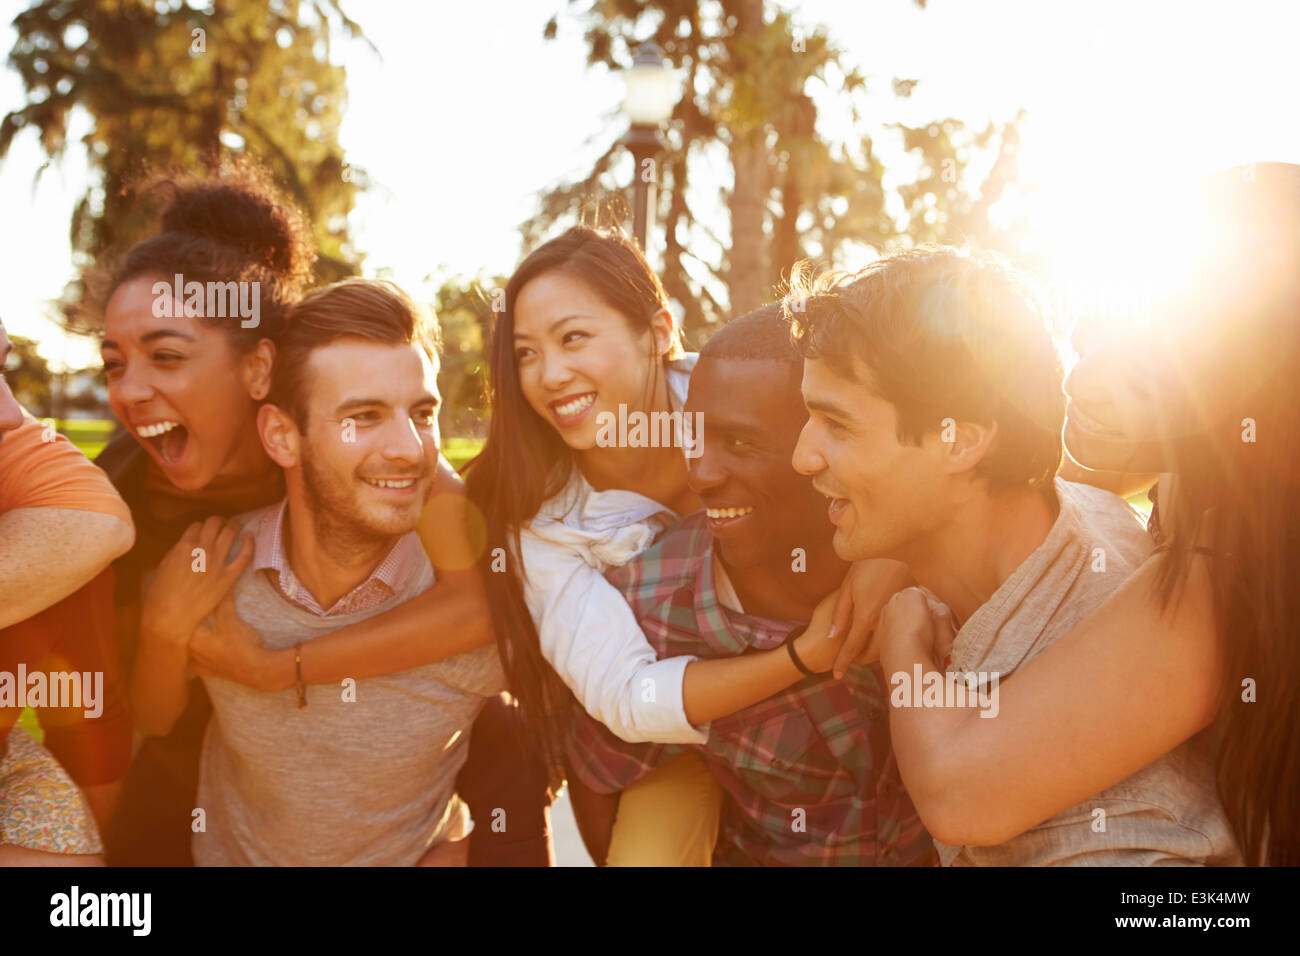 Group Of Friends Having Fun Together Outdoors Stock Photo